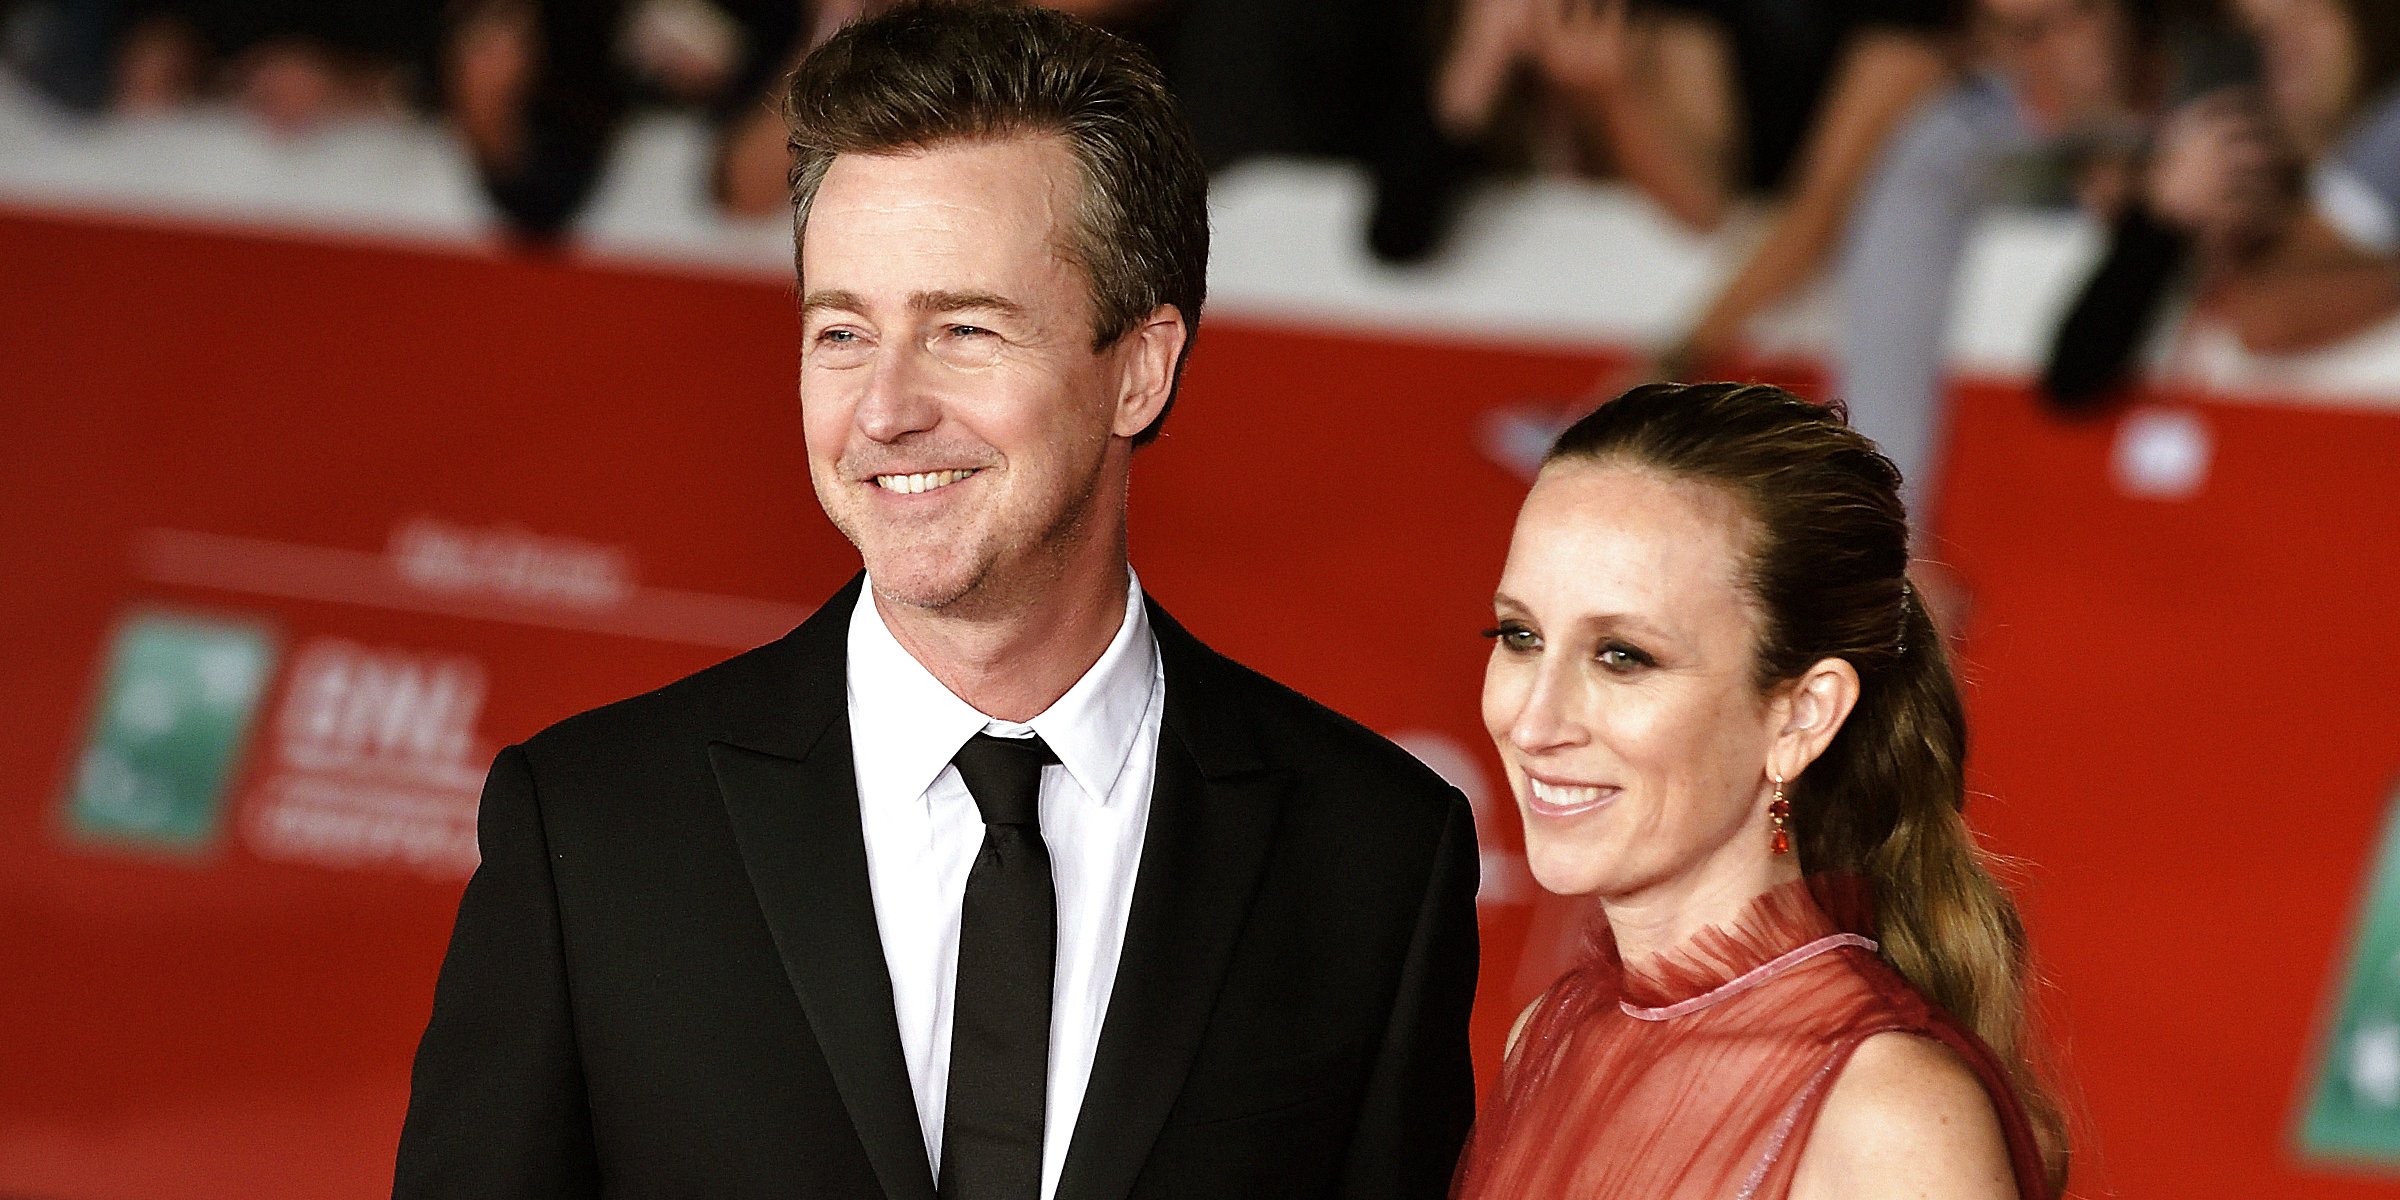 Edward Norton and Shauna Robertson. | Source: Getty Images